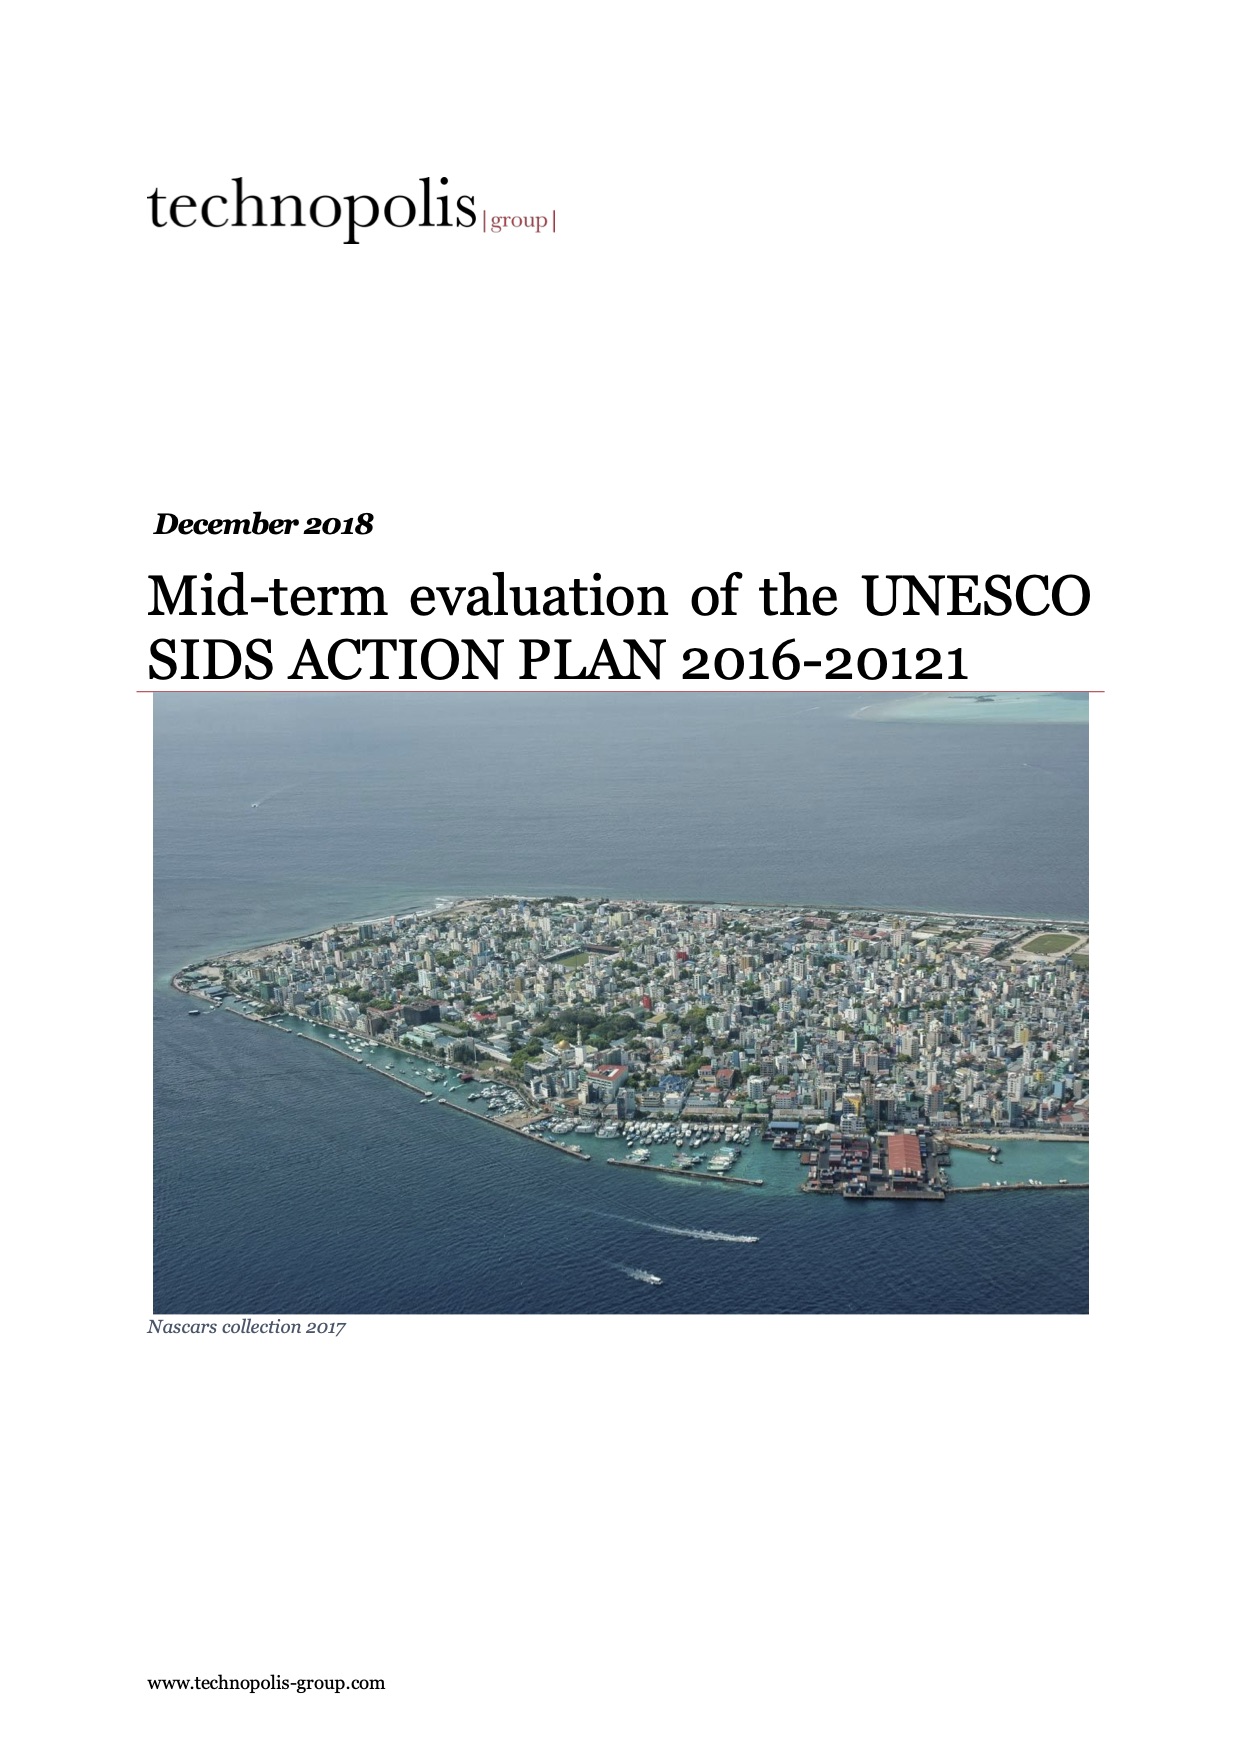 Mid-term review of the “UNESCO Small Island Development States Action Plan”